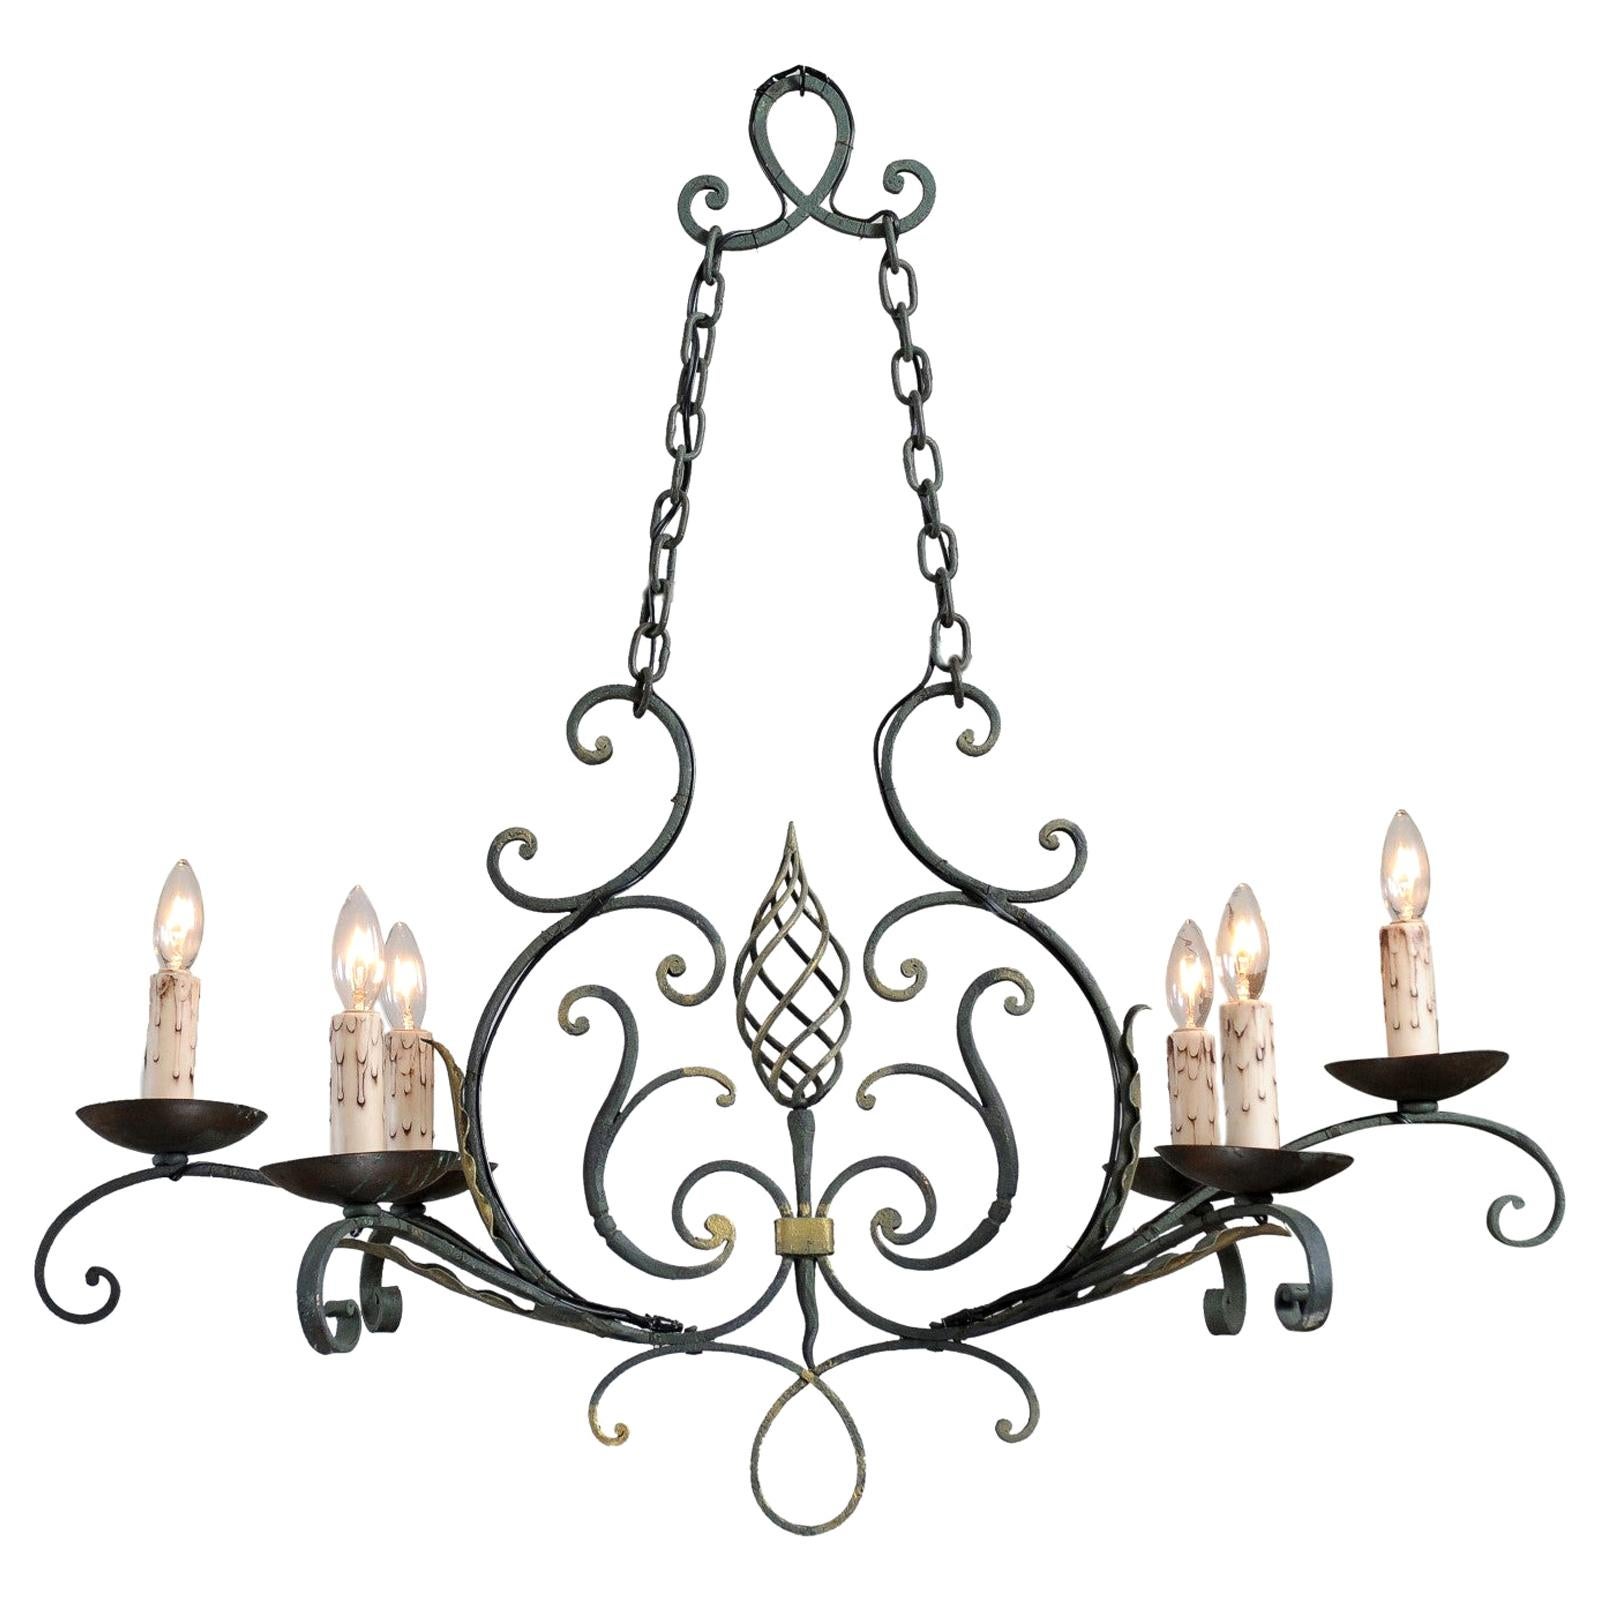 French 19th Century Six-Light Iron Chandelier with Spiral and Scrolling Arms